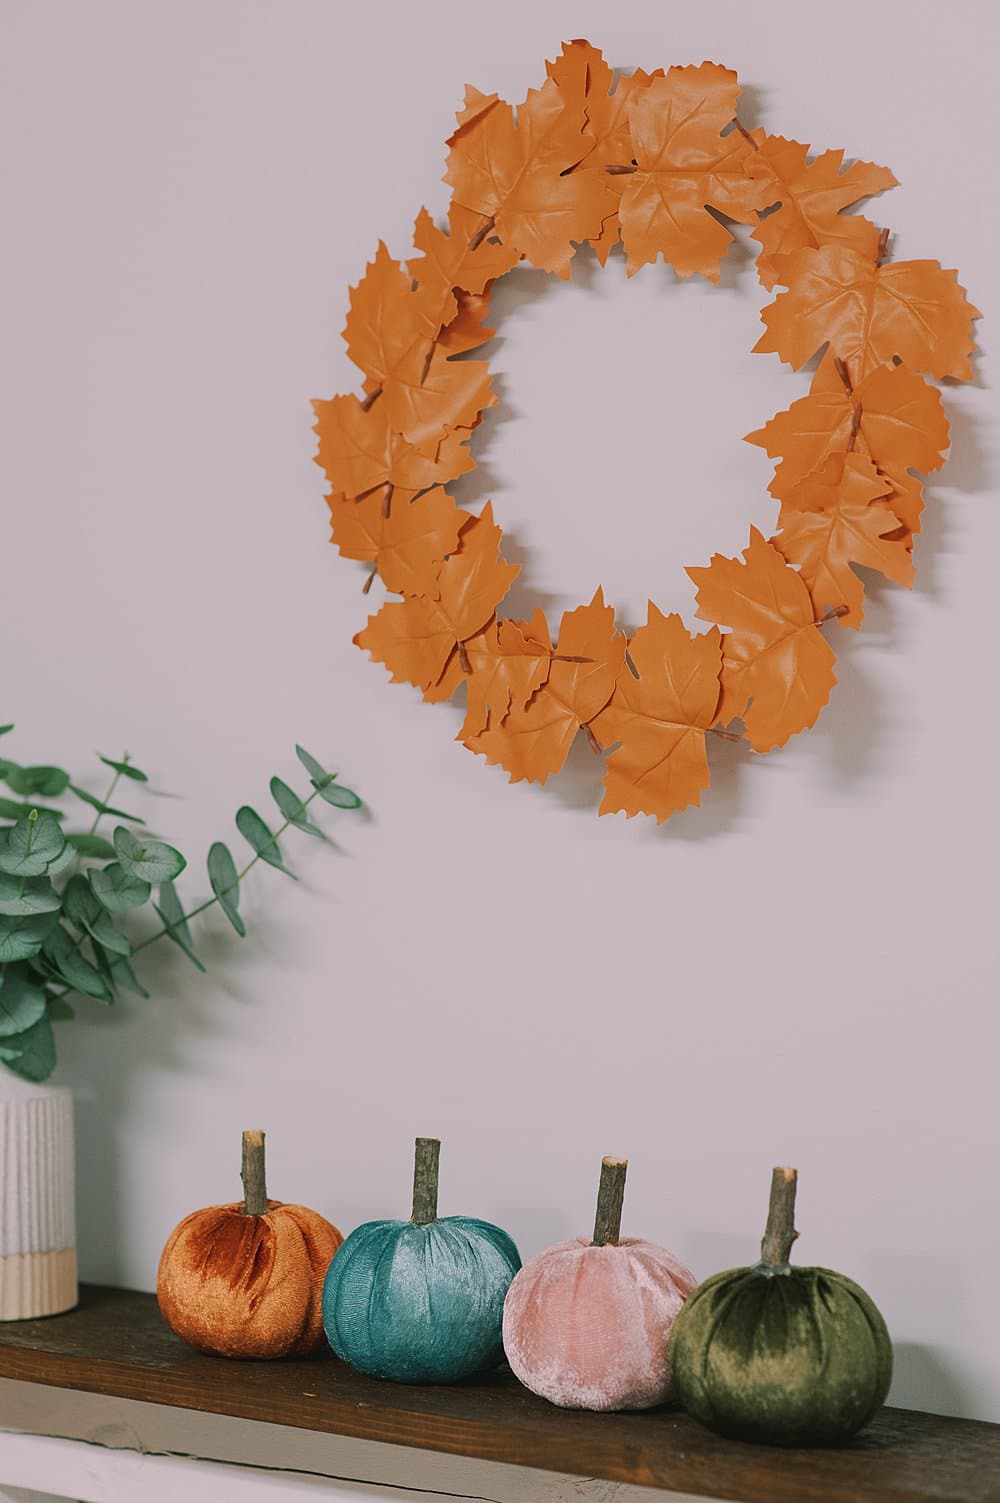 How to Make a Faux Leather Leaf Wreath